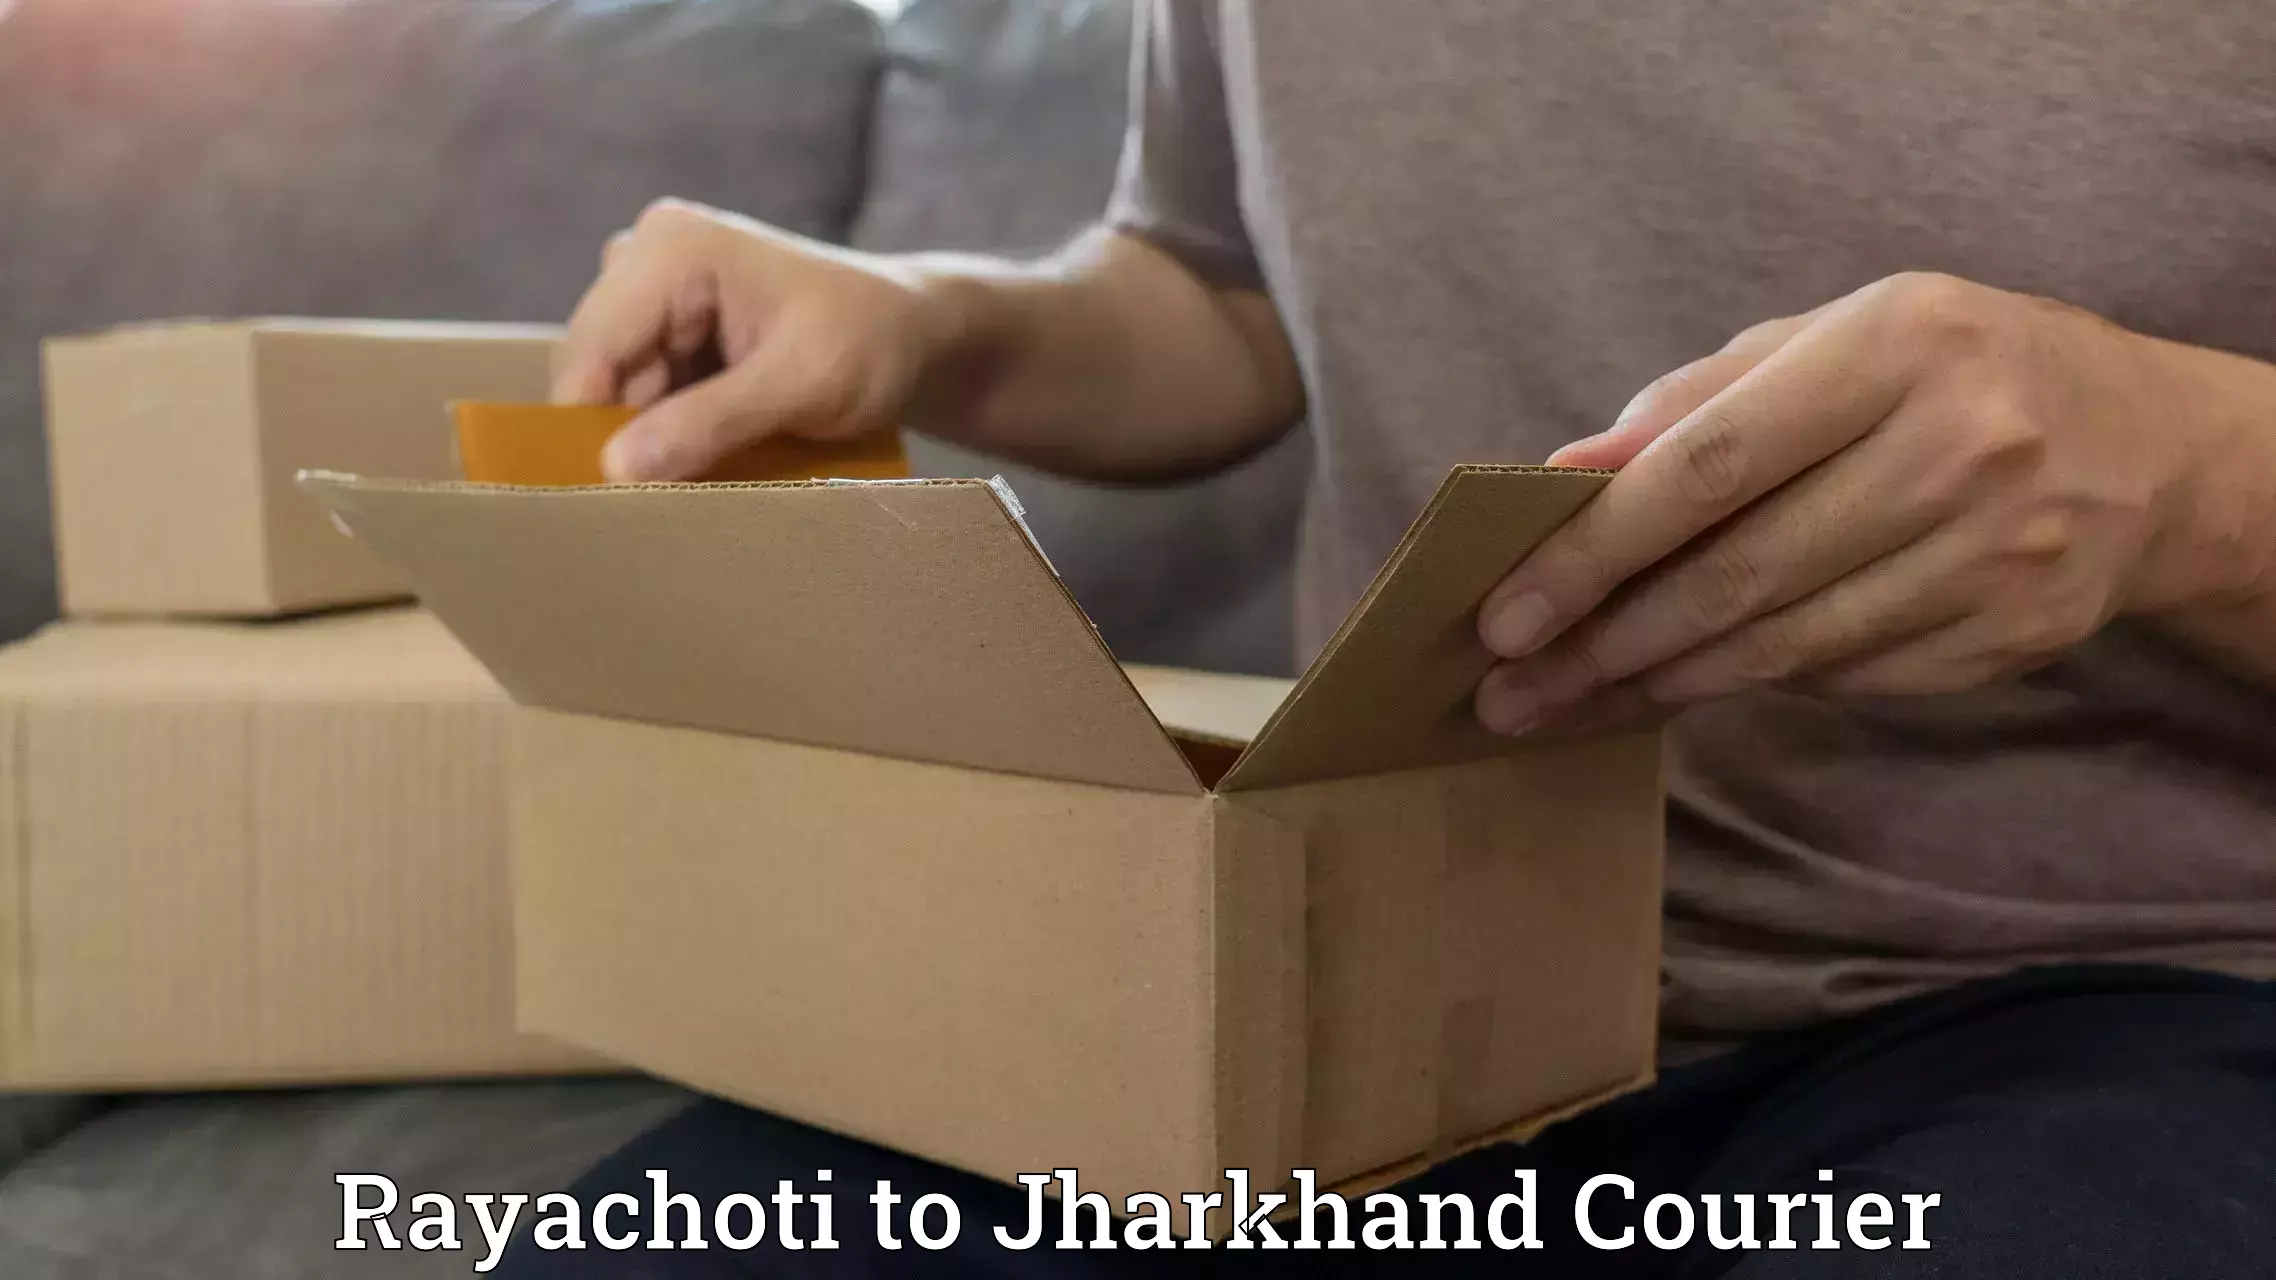 Express package delivery Rayachoti to Ranchi